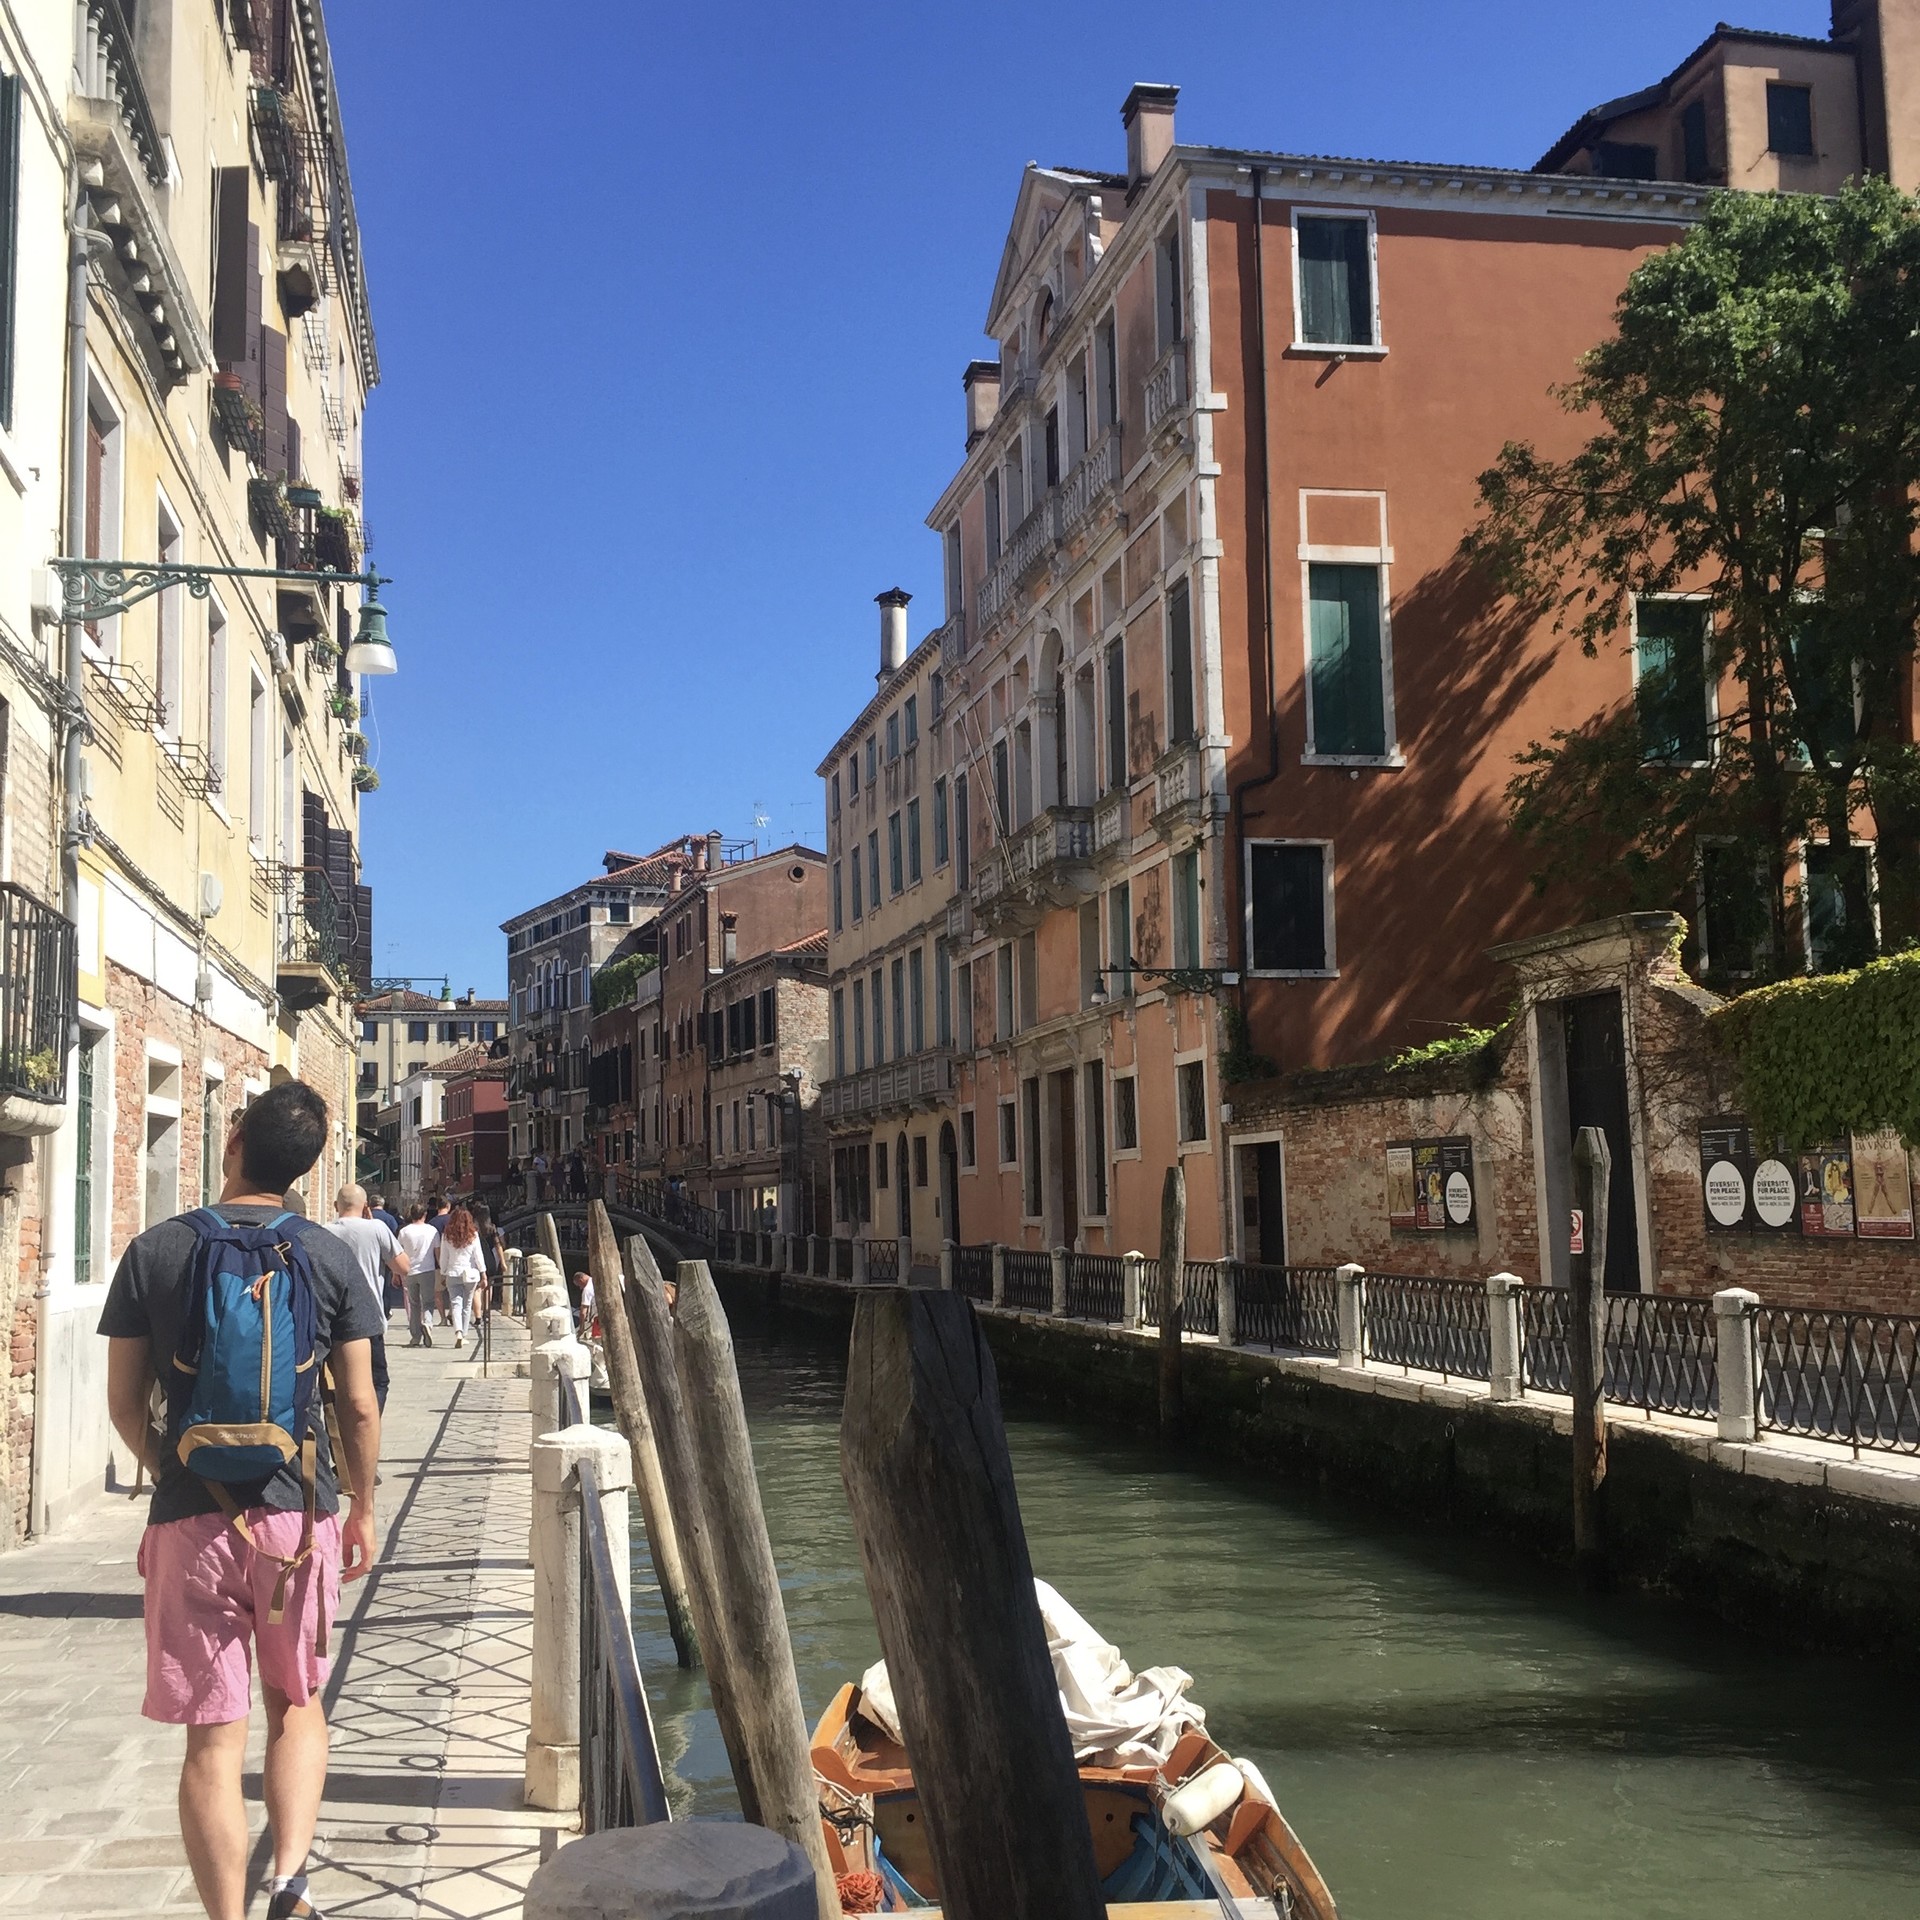 two-hours-venice-nought-euros-spent-dd83